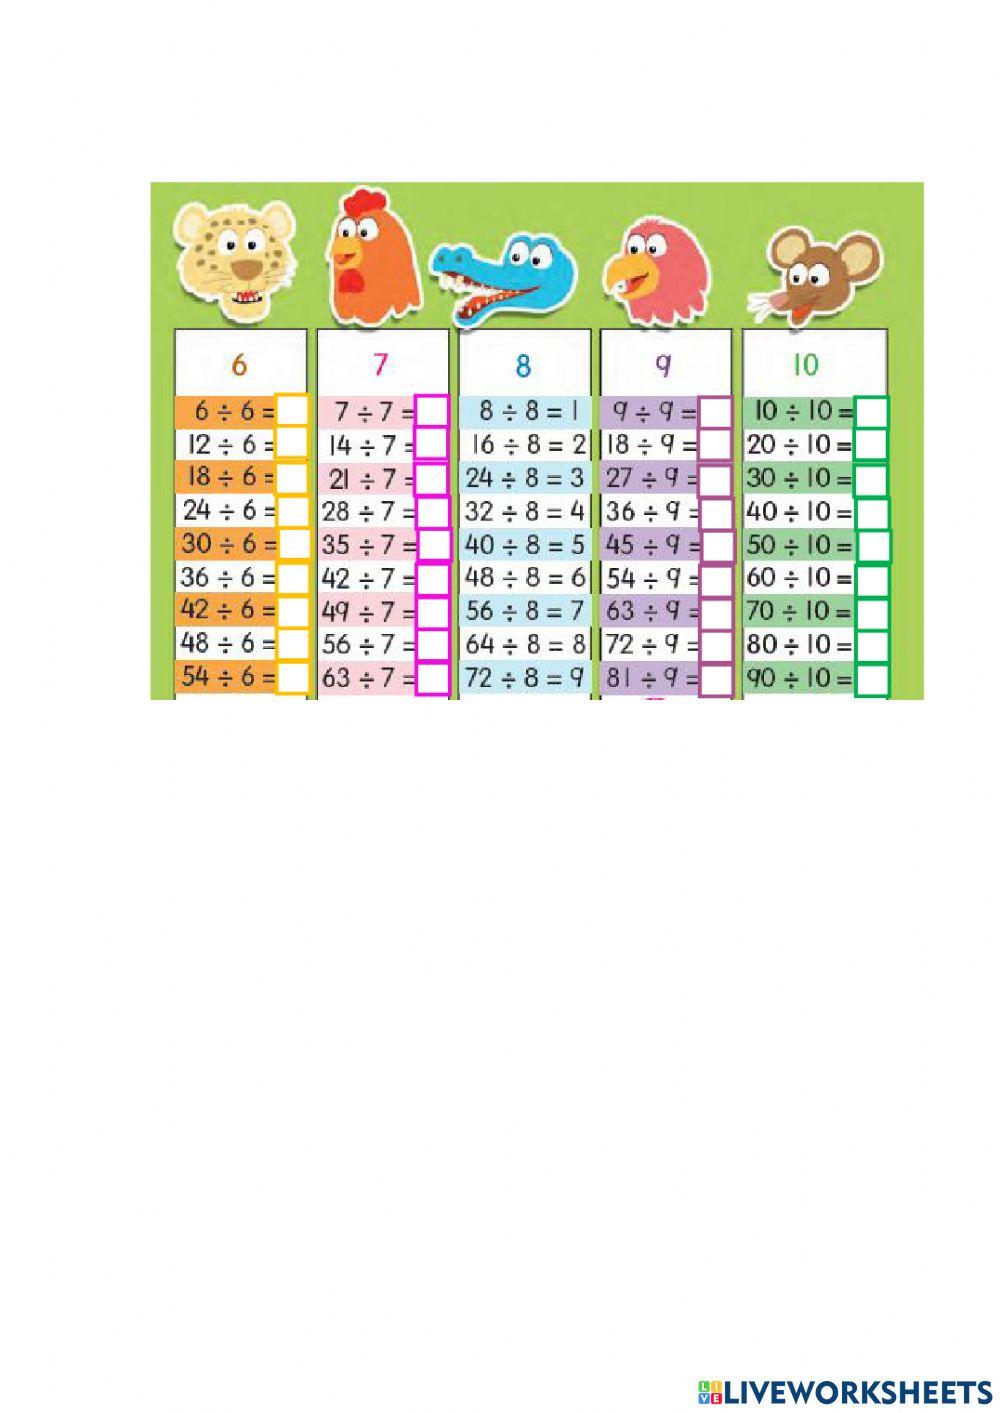 Division time tables